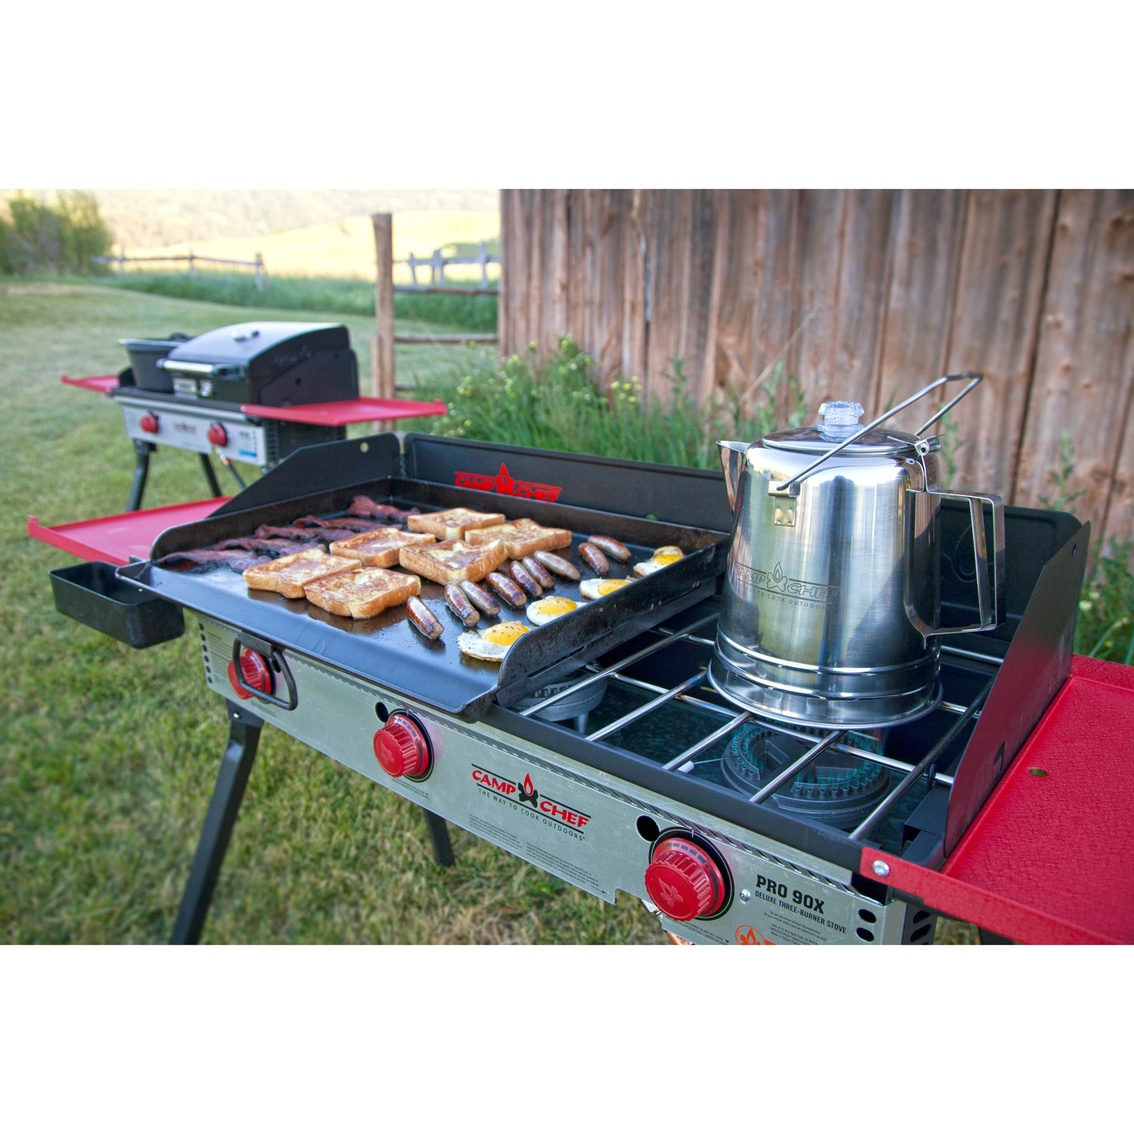 Camp Chef Pro 60X Two Burner Stove - Image 4 of 4